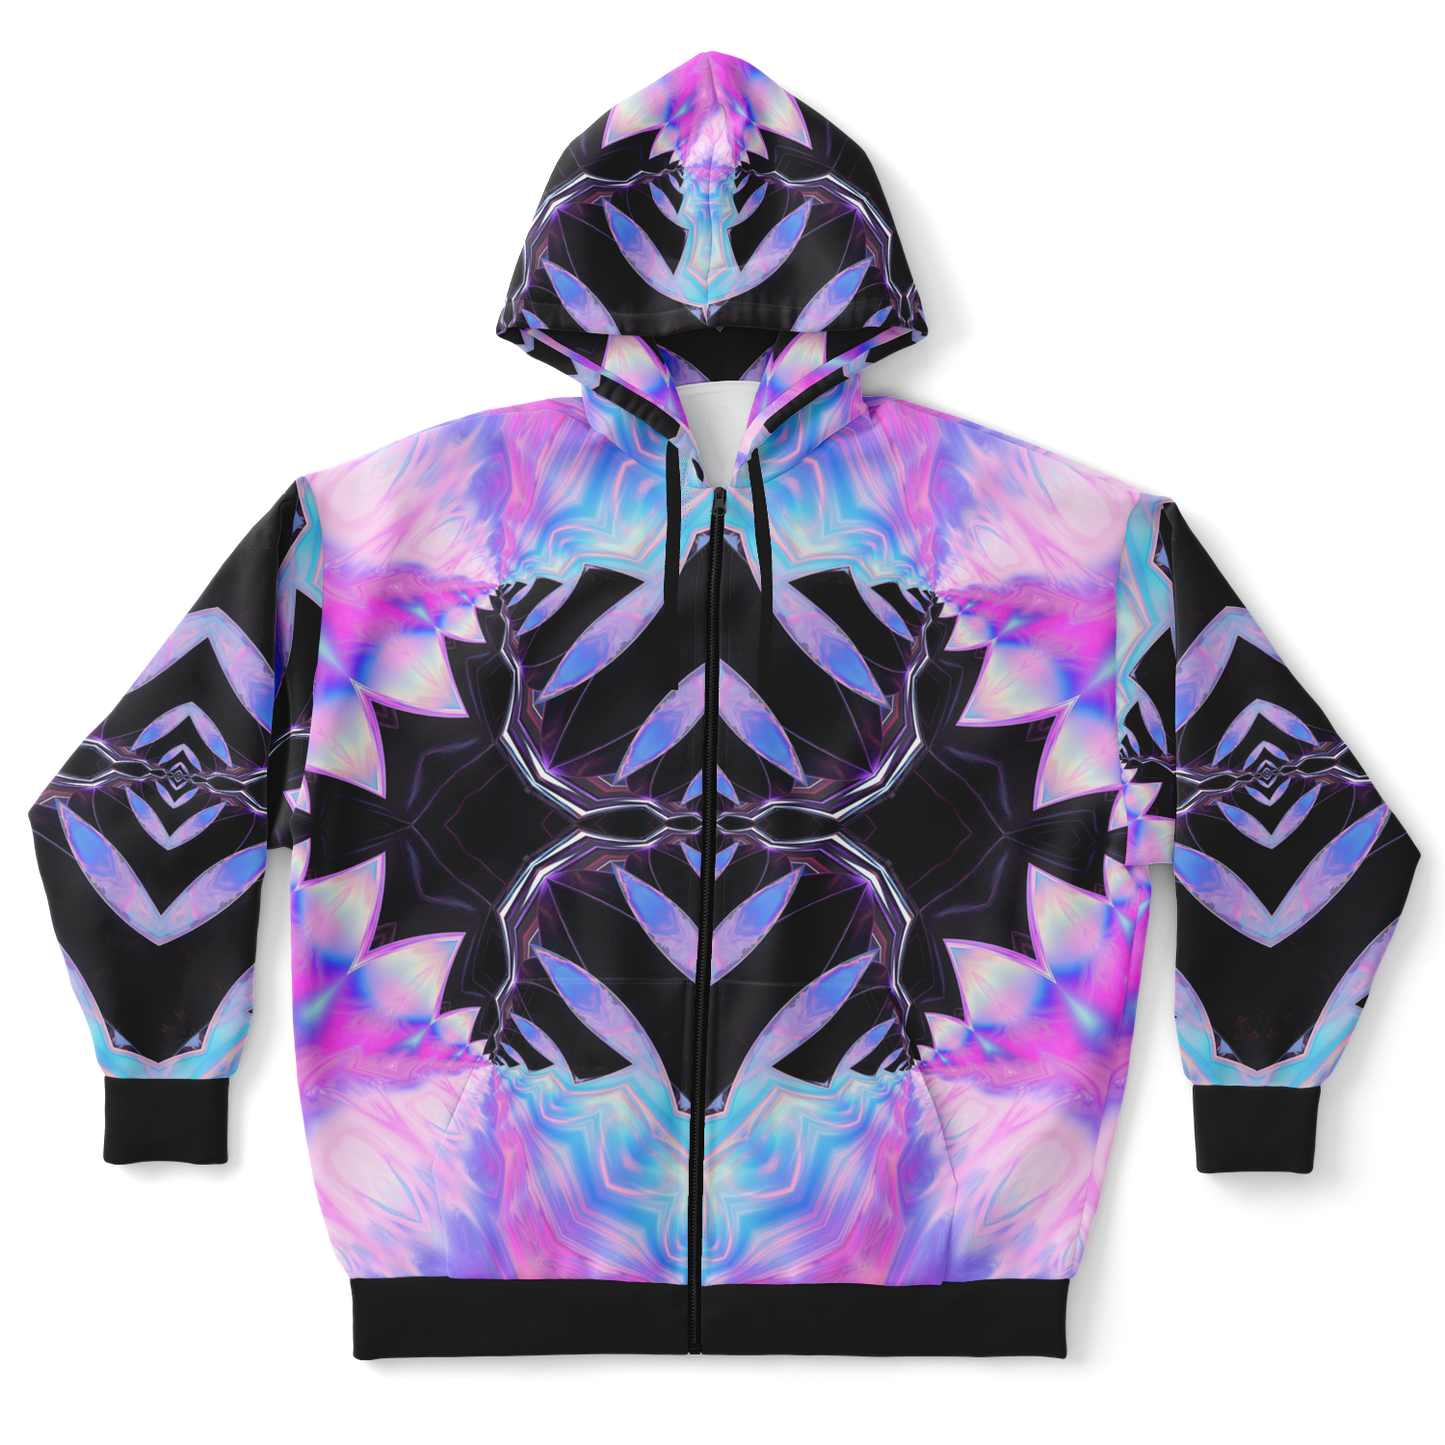 Starburst Zip Up Hoodie, Thicc King and Queen Size